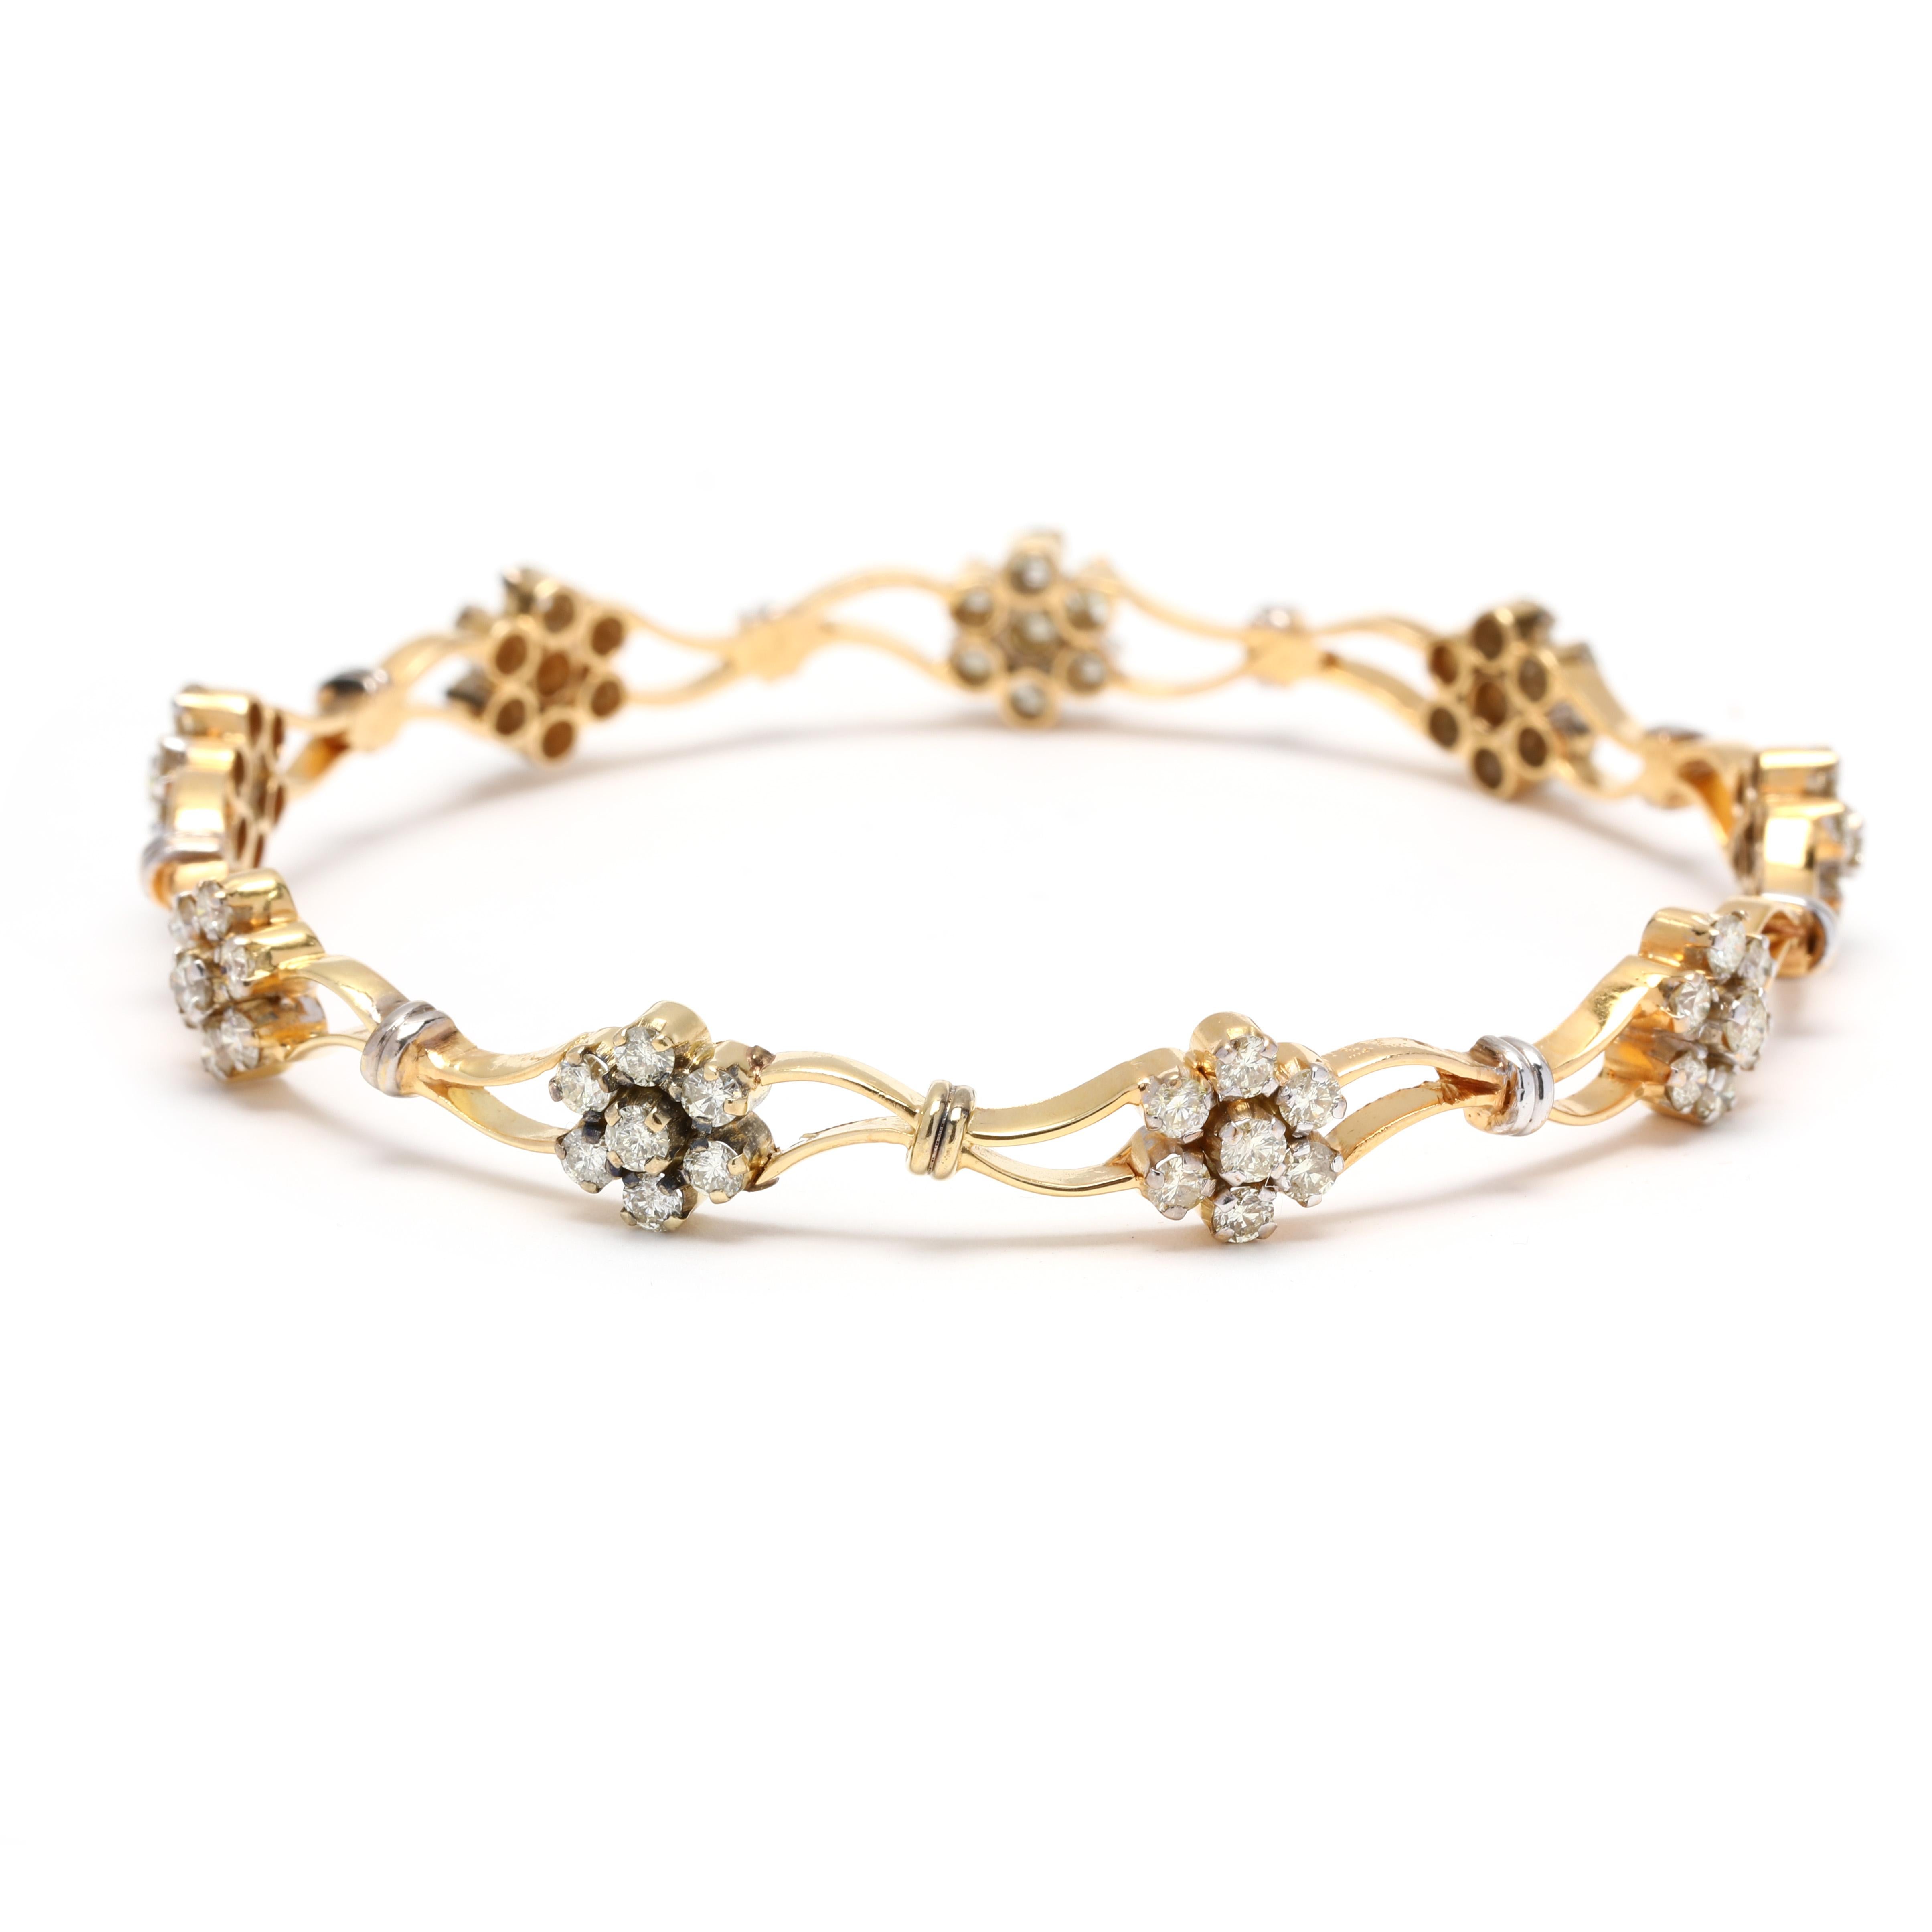 Brilliant Cut 2.5CTW Diamond Flower Bangle, 18K Yellow Gold, Length 7.75 Inches, Stackable